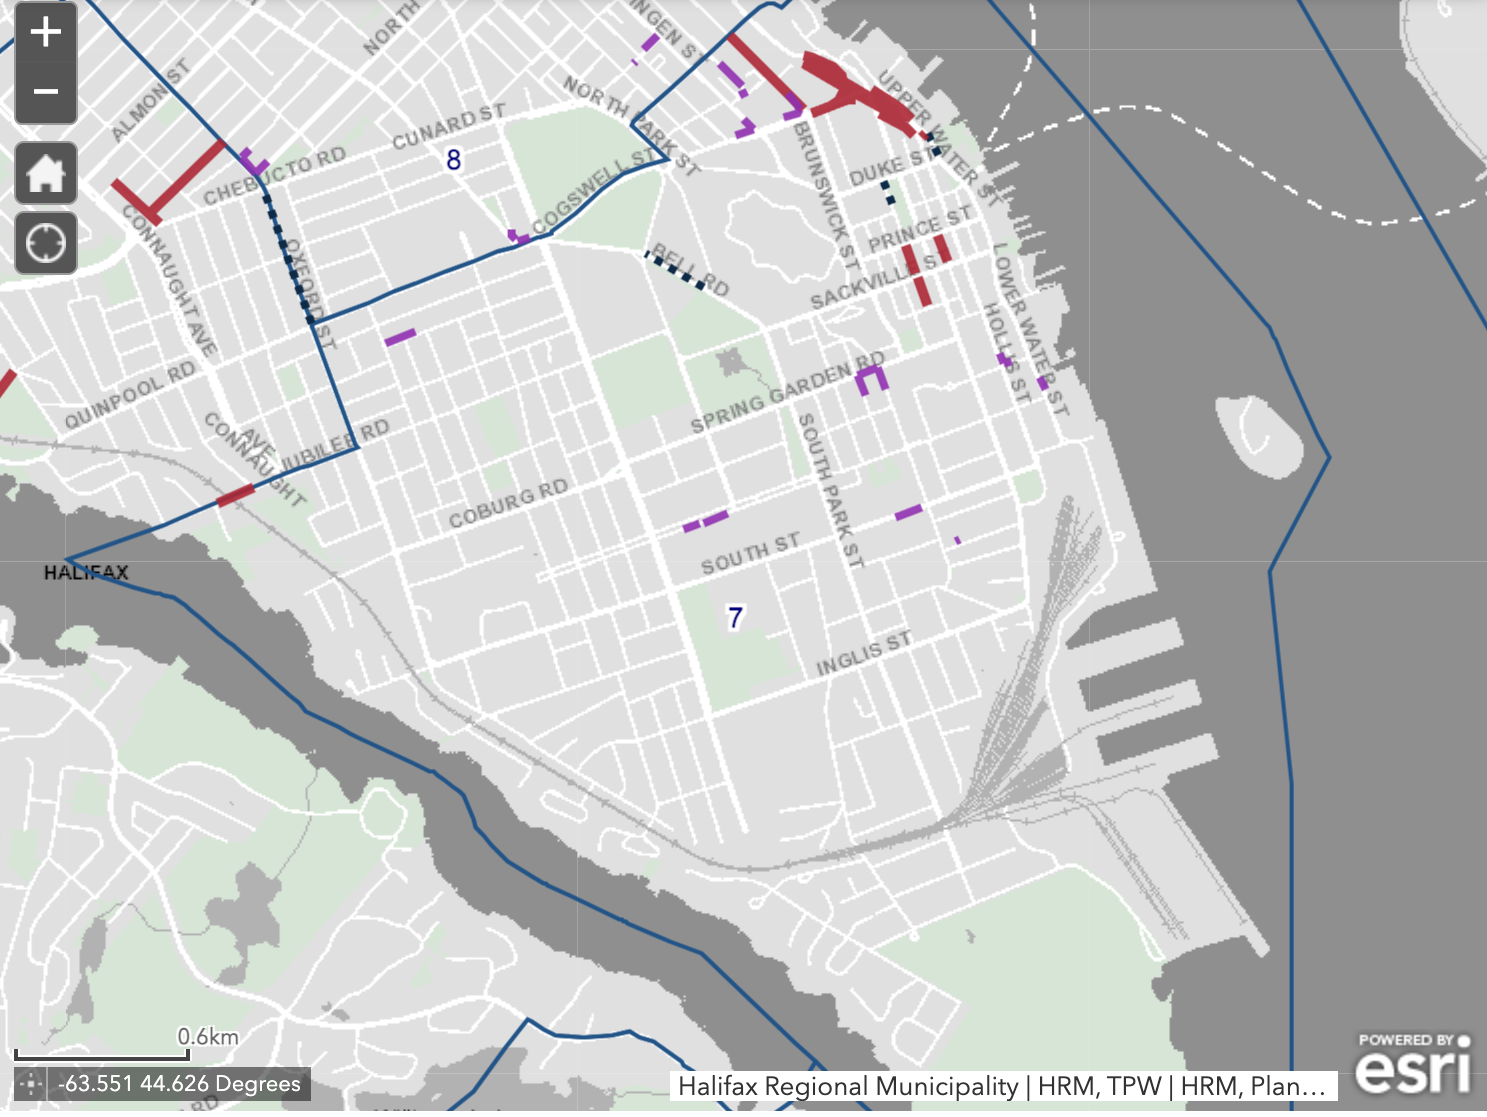 Roadworks map showing construction on roads and sidewalks